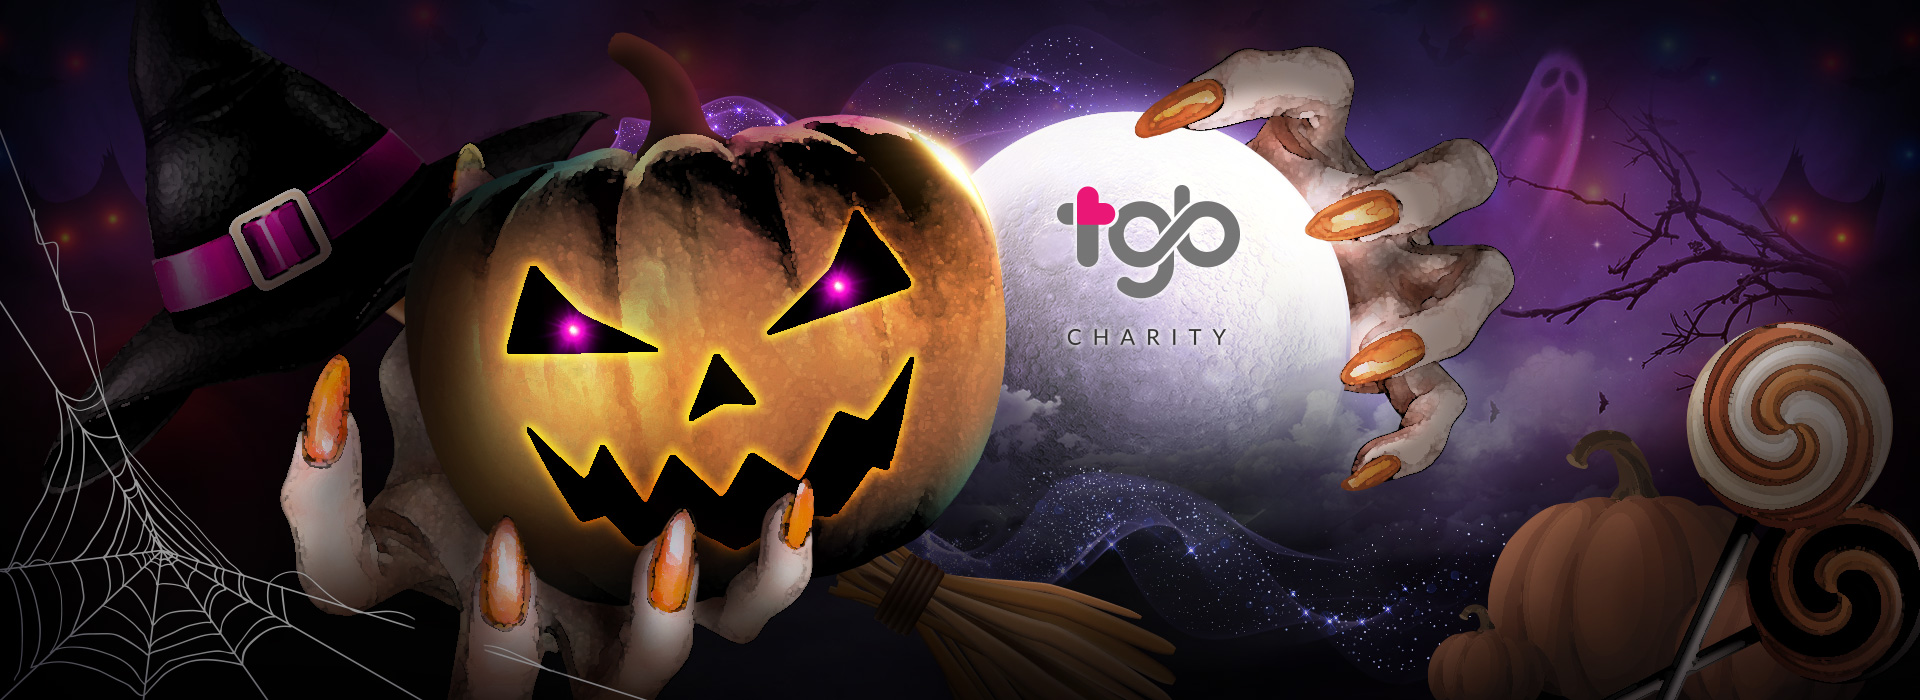 Wanna experience a unique and significant Halloween? - TGB Charity